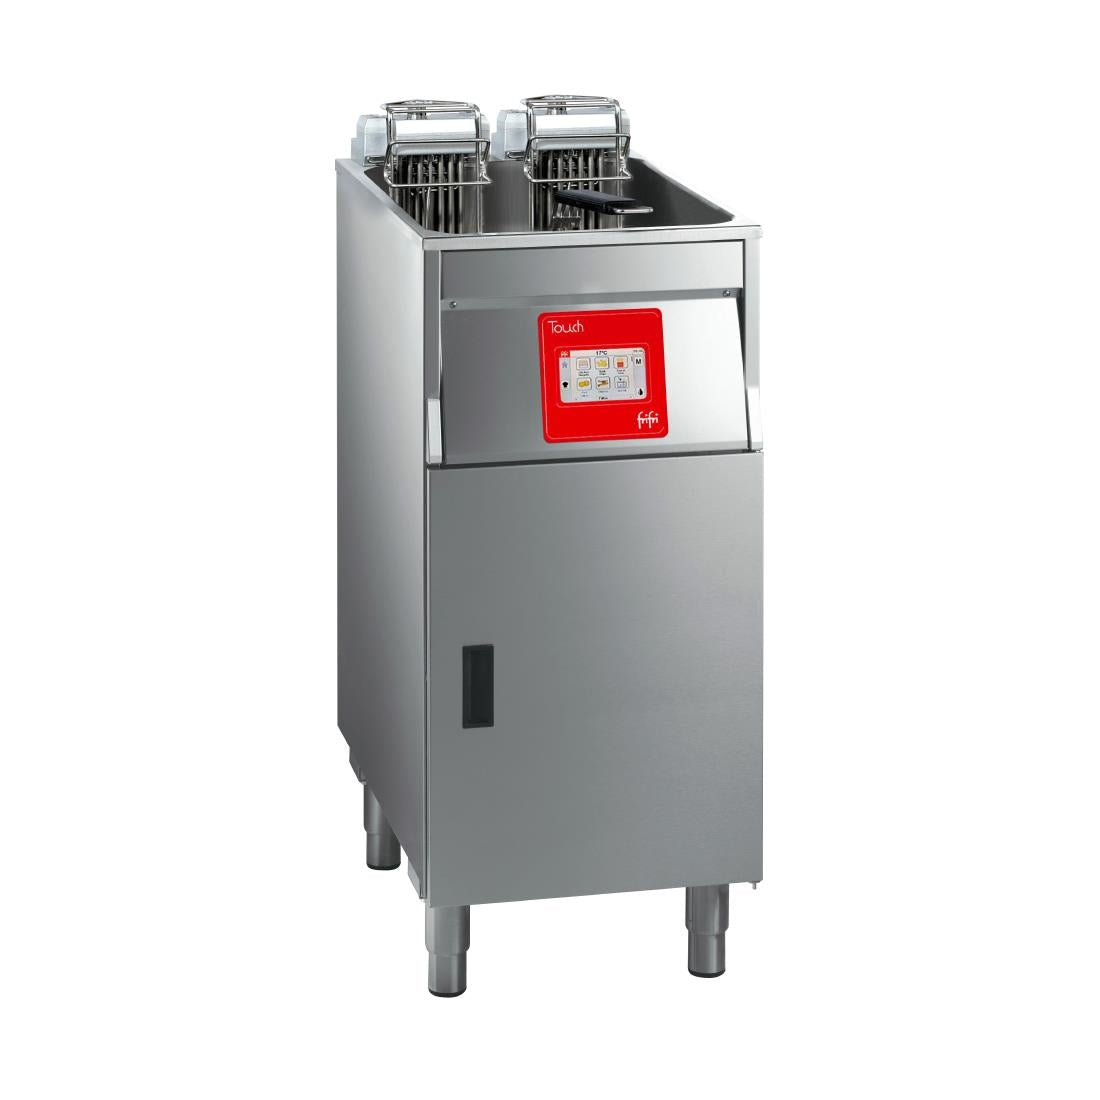 HS008-3PH FriFri Touch 411 Electric Free-Standing Single Tank Fryer 1 Basket 22kW - Three Phase